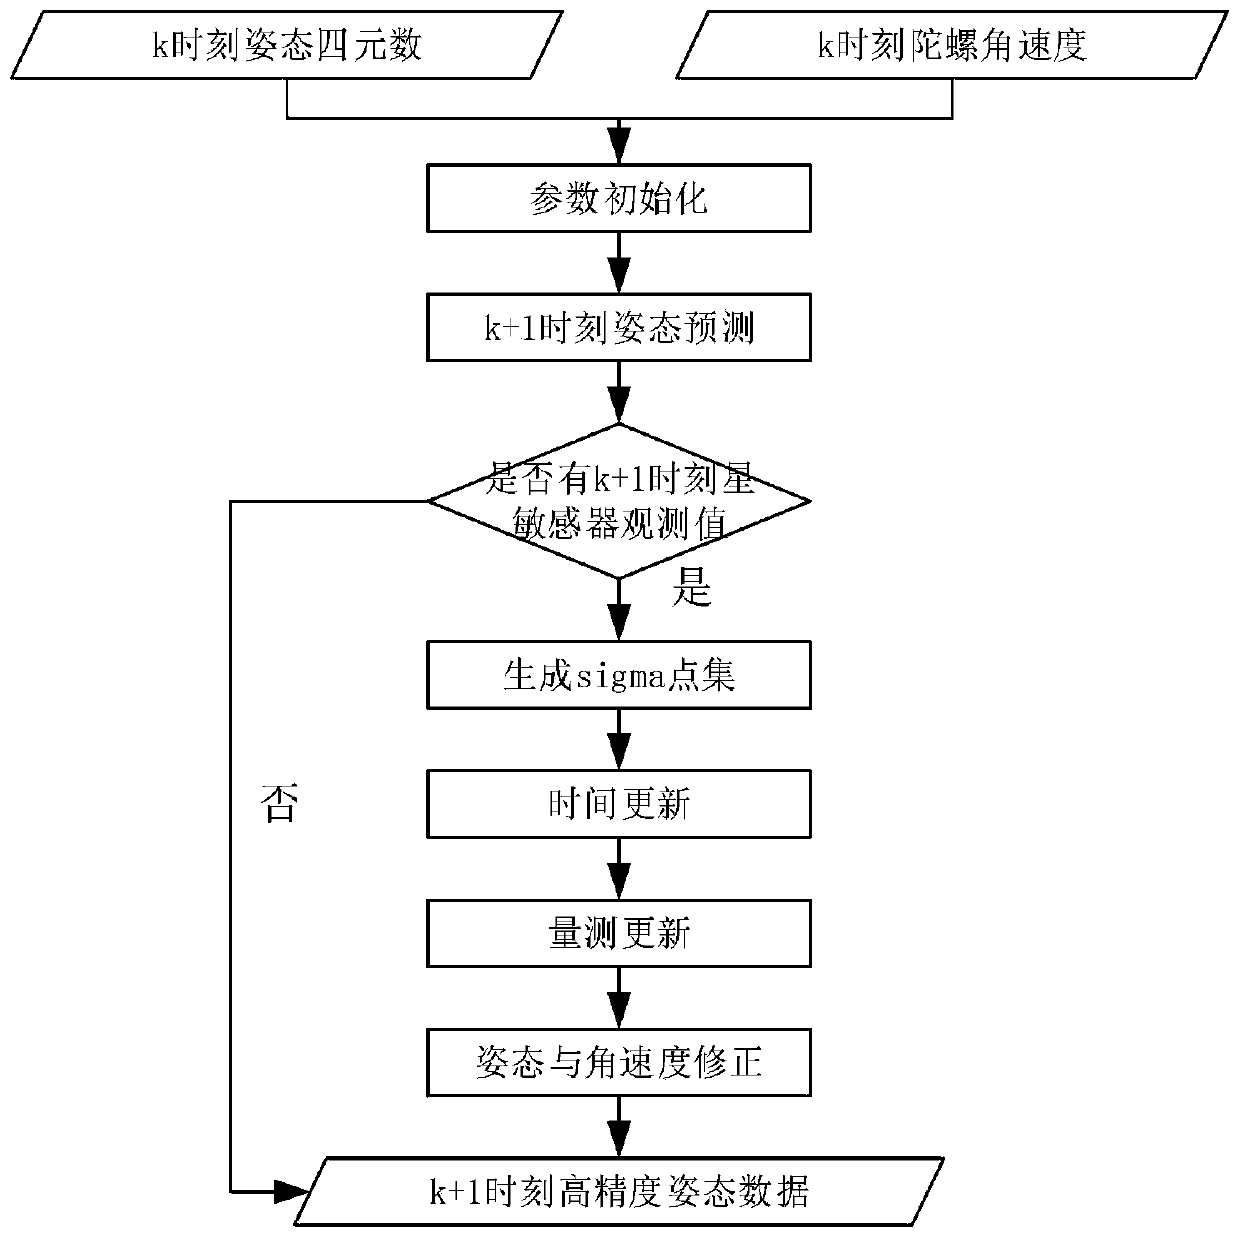 Unscented Kalman filtering (UKF) based combined attitude determining method and satellite attitude control system